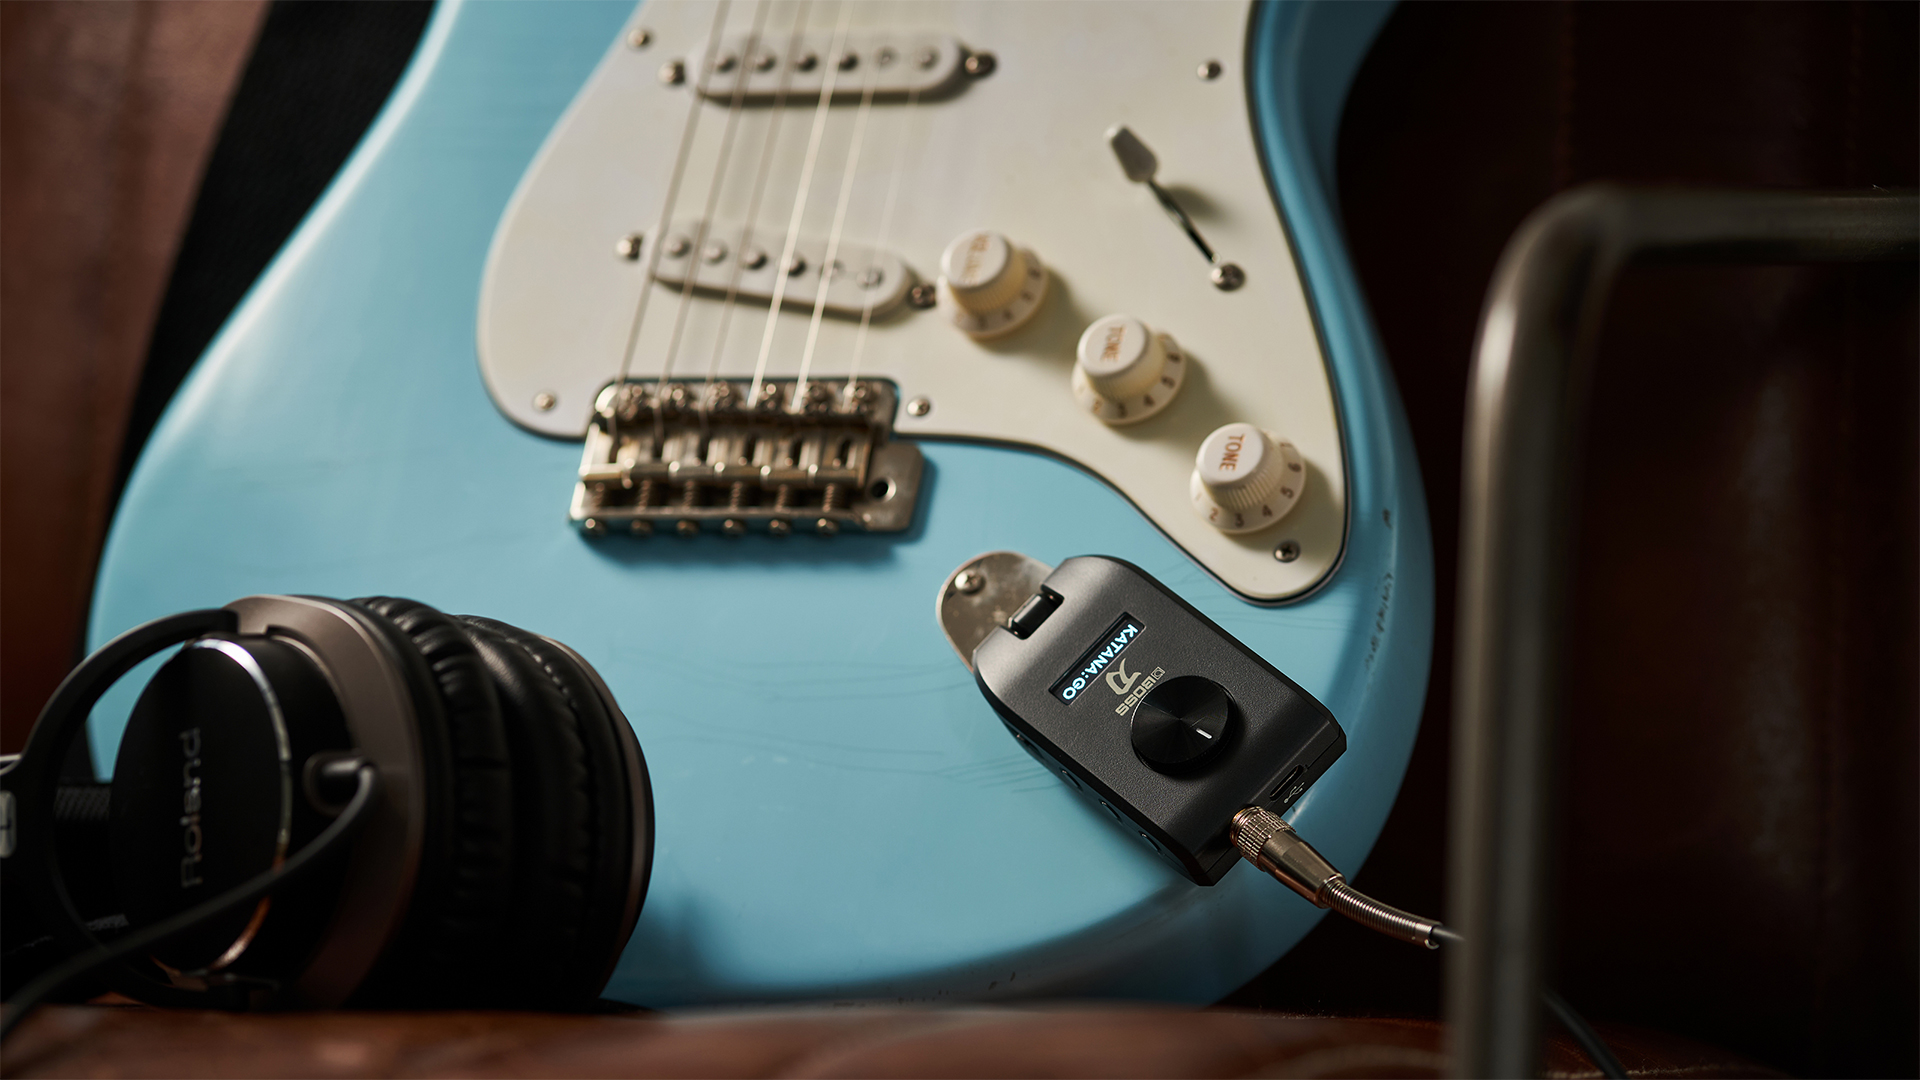 Puts authentic sounds from the stage class Boss Katana amp series at the  instrument's output jack”: Has the Katana:GO just changed the headphone amp  game forever? | Guitar World